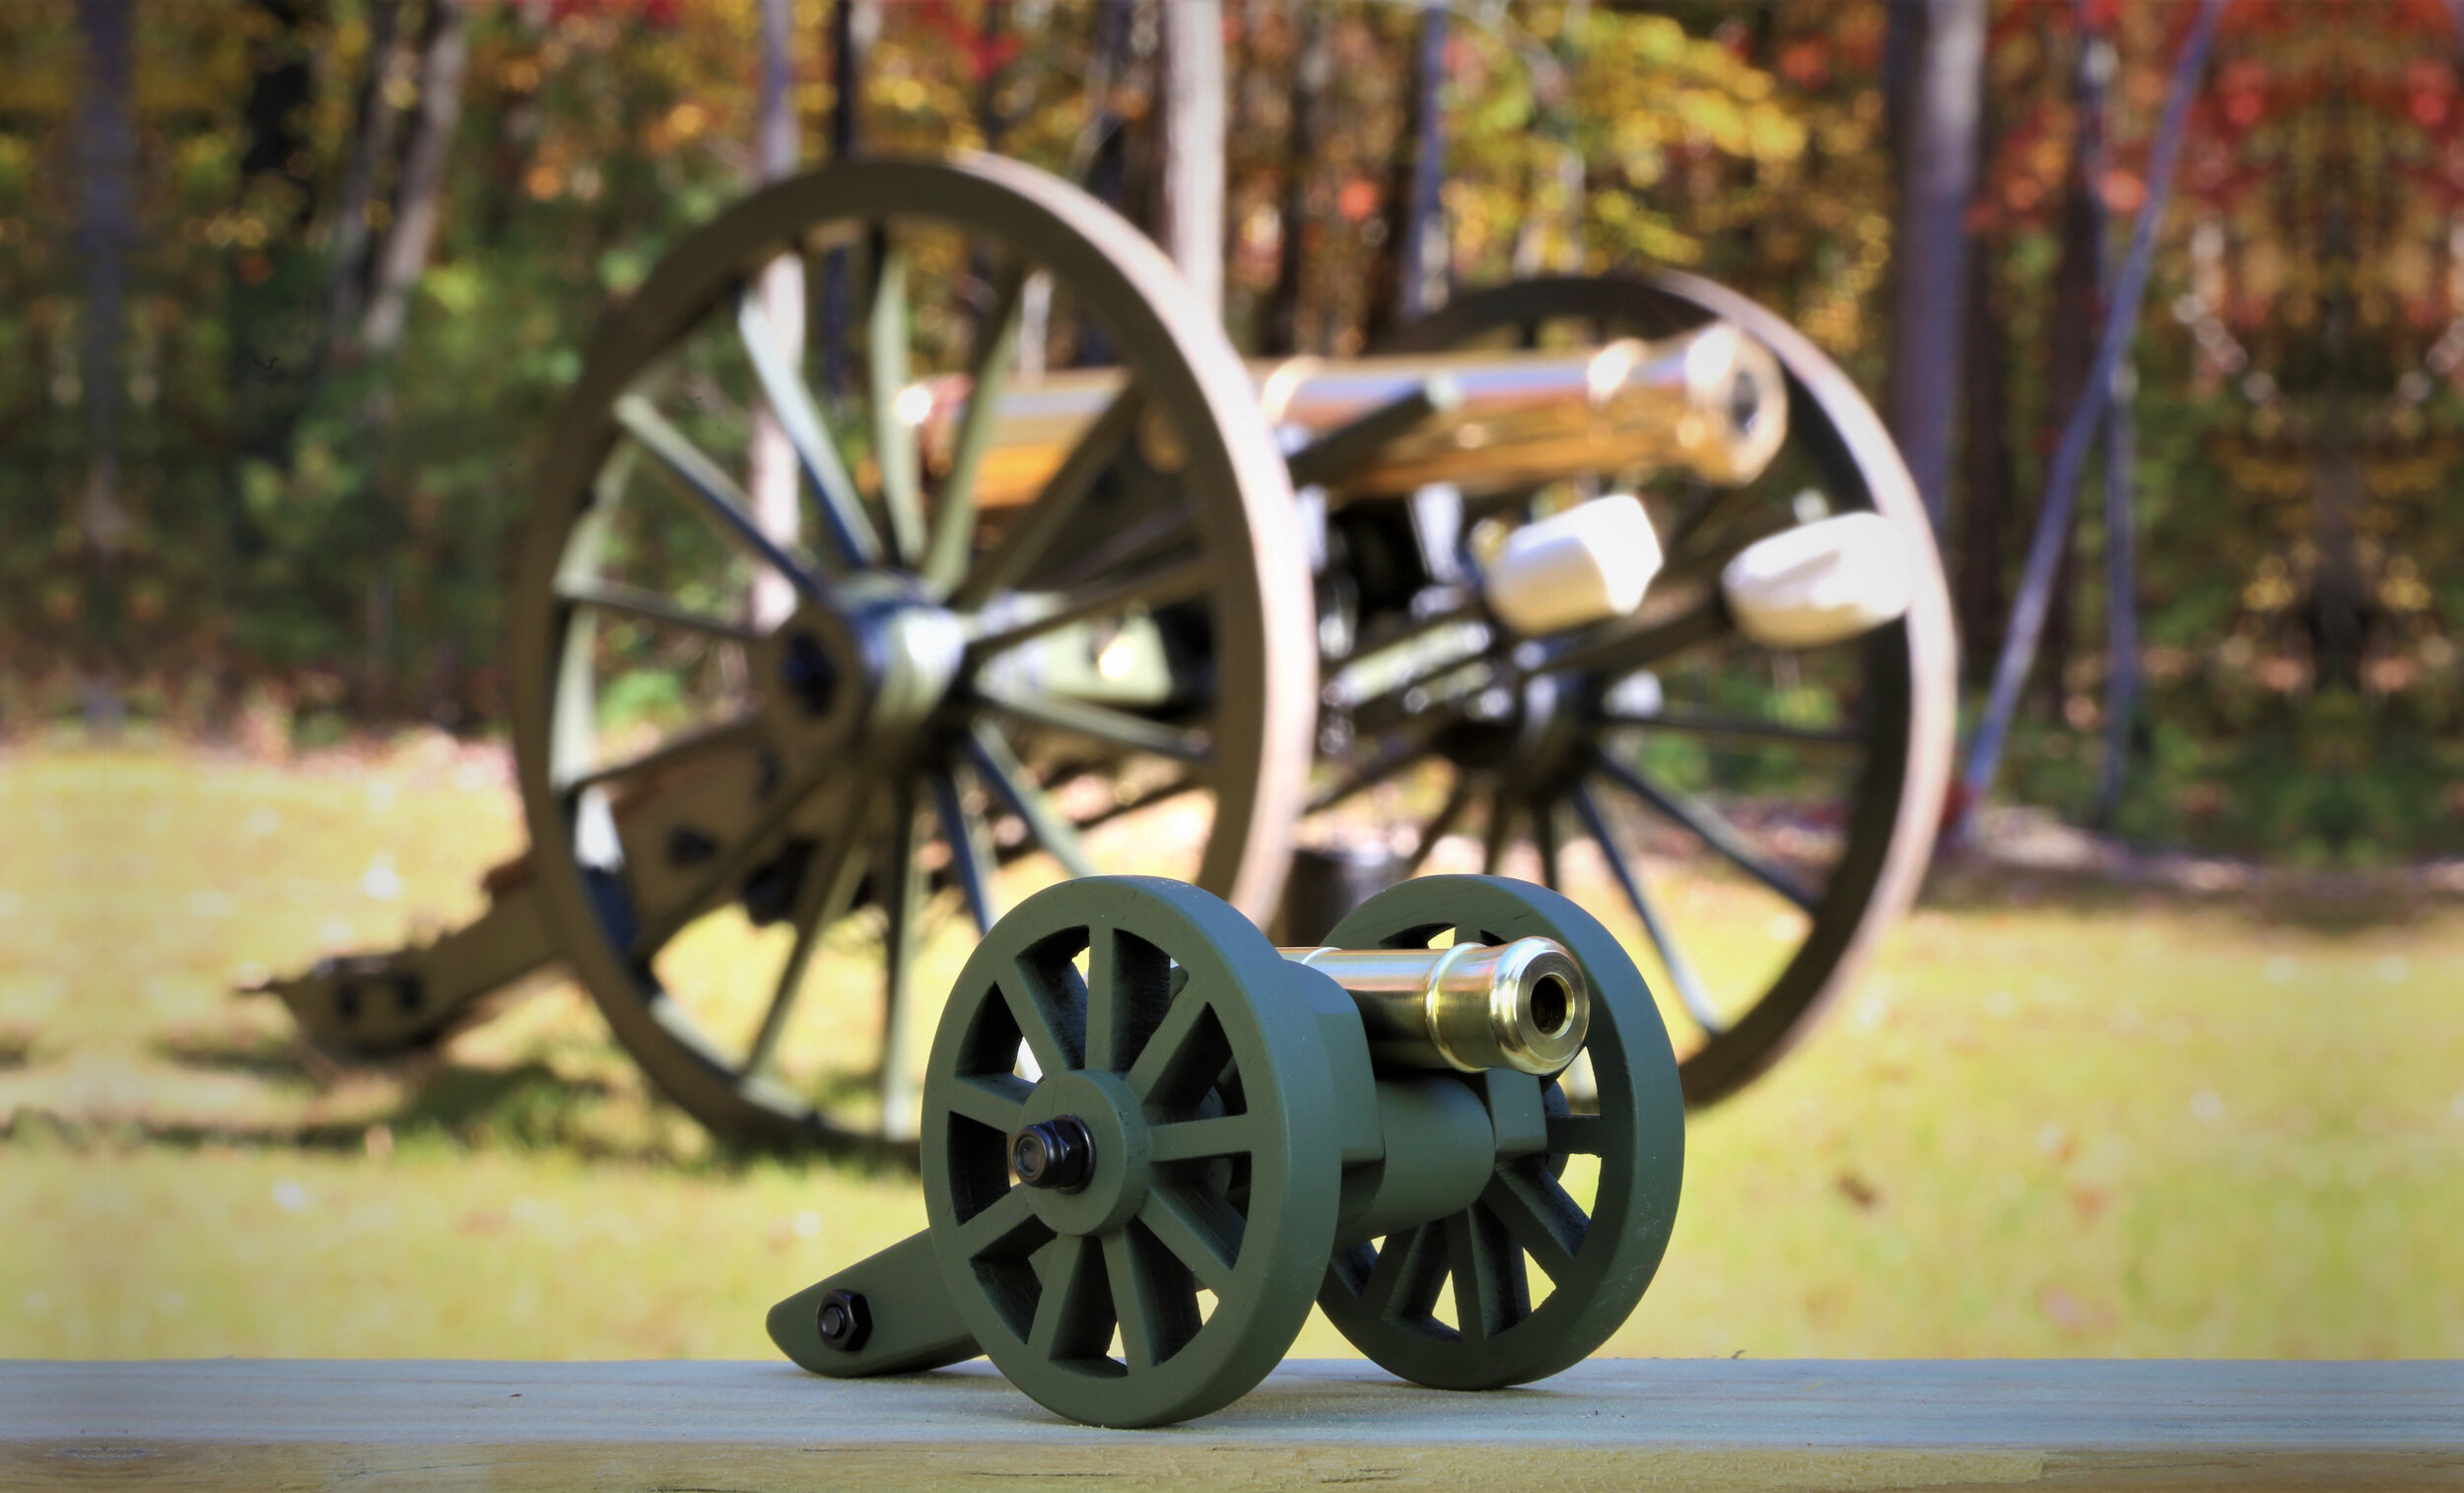 Shoots rounds 3 feet Mini ModelScale Replica Collectible Model Cannon 